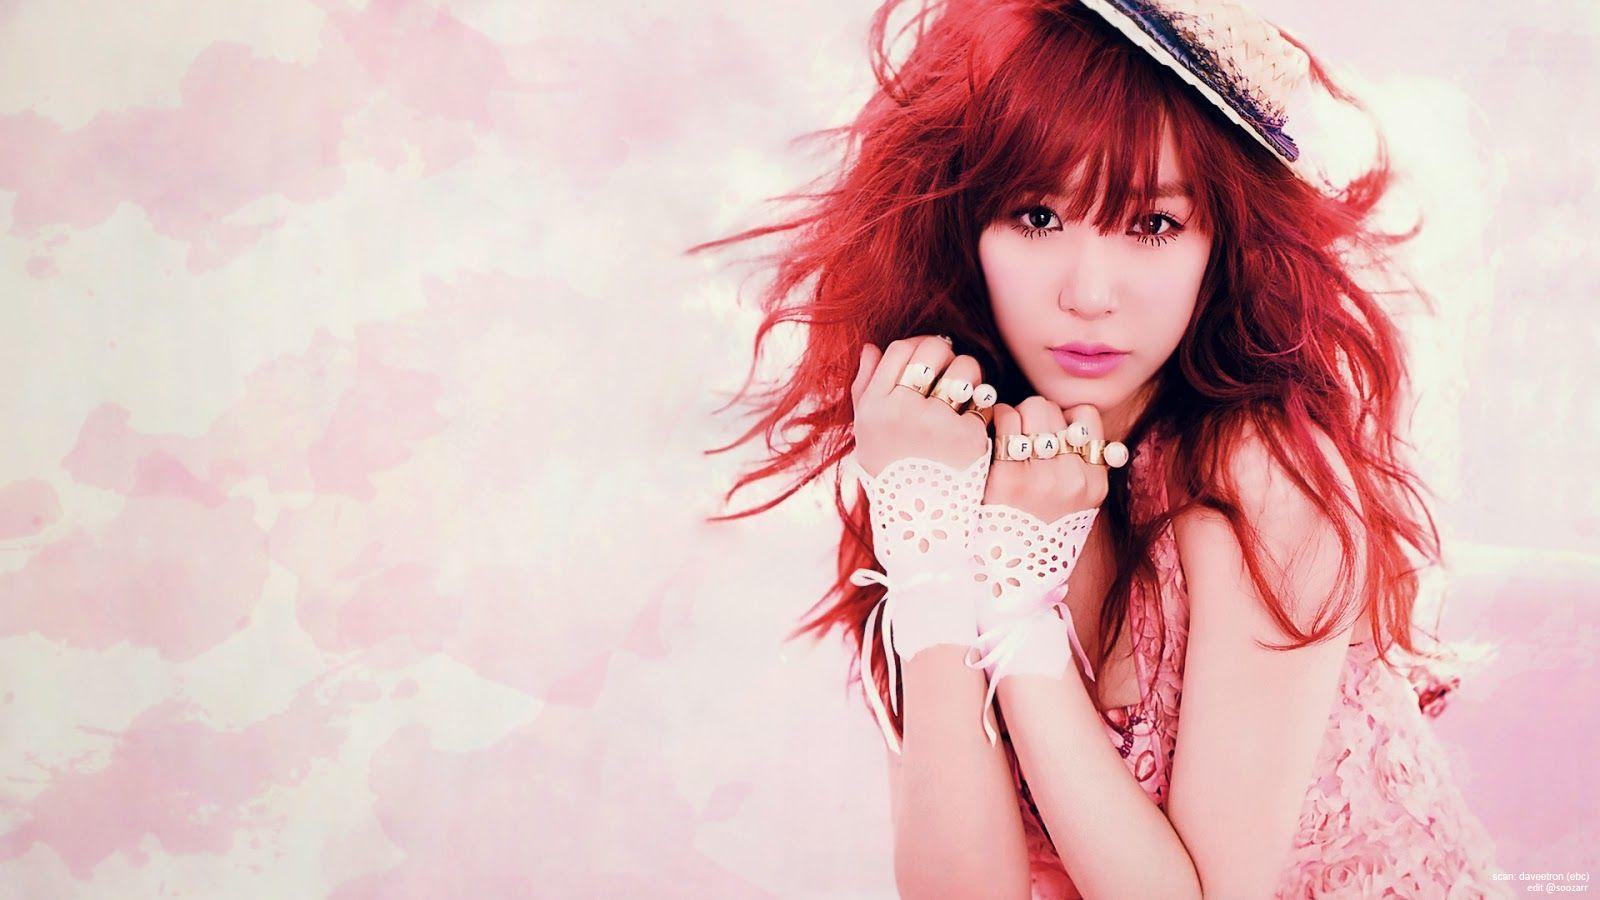 Tiffany SNSD Wallpapers - Wallpaper Cave